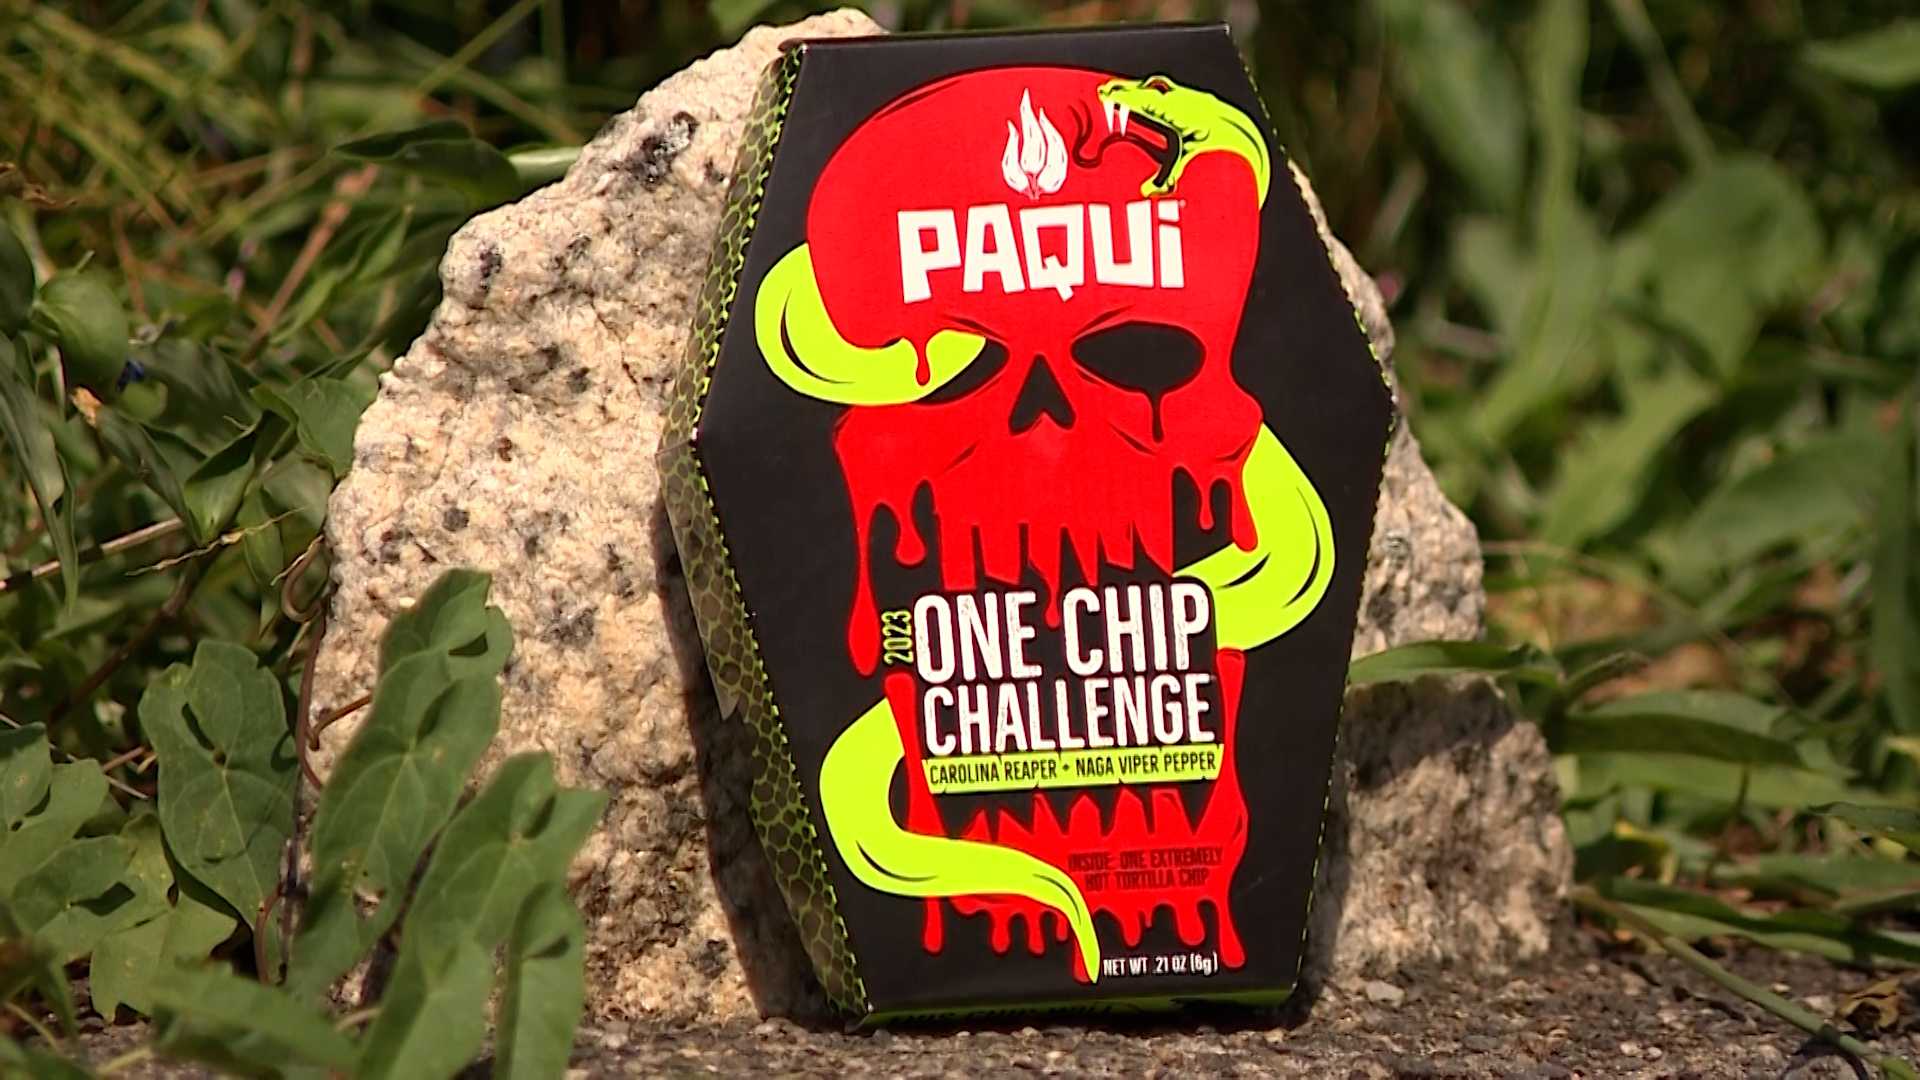 10 students at Mass. middle school sickened by 'One Chip Challenge